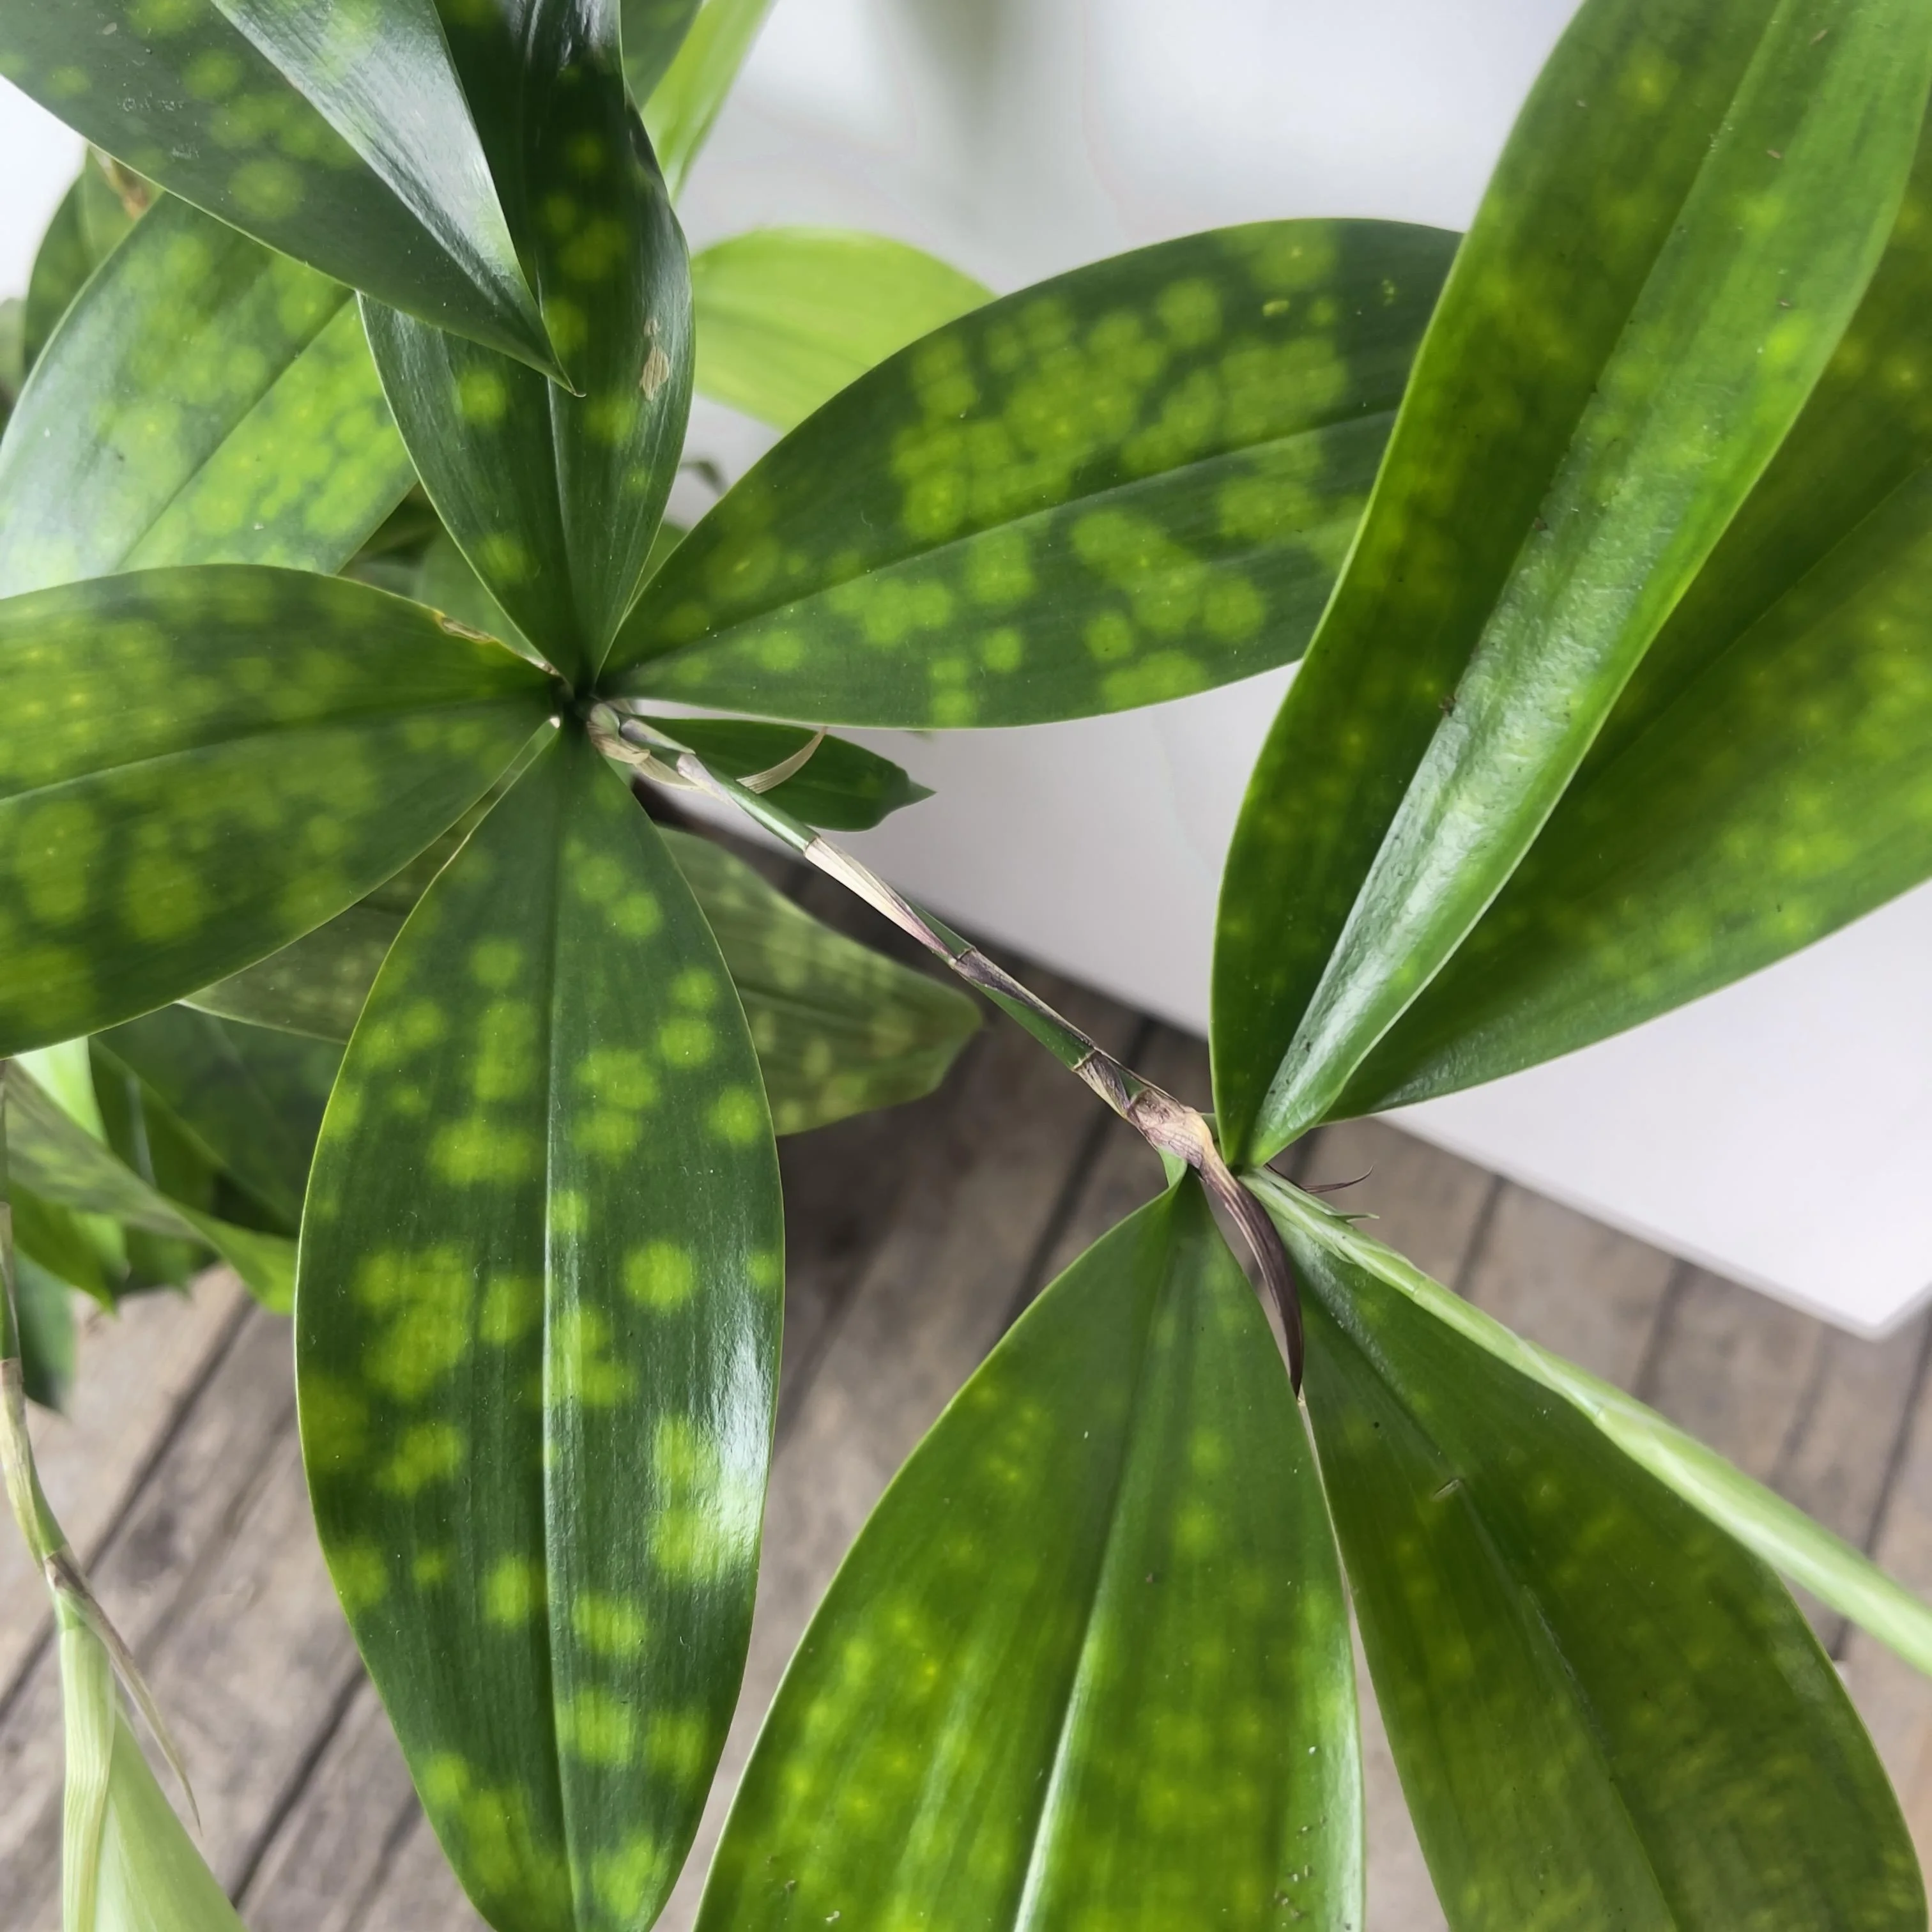 <p><span style="font-family: Inter, helvetica, arial, sans-serif">Dracaena Gold dust, Japanese Bamboo, Gold Dust Plant, Spotted Leaf Dracaena</span></p>